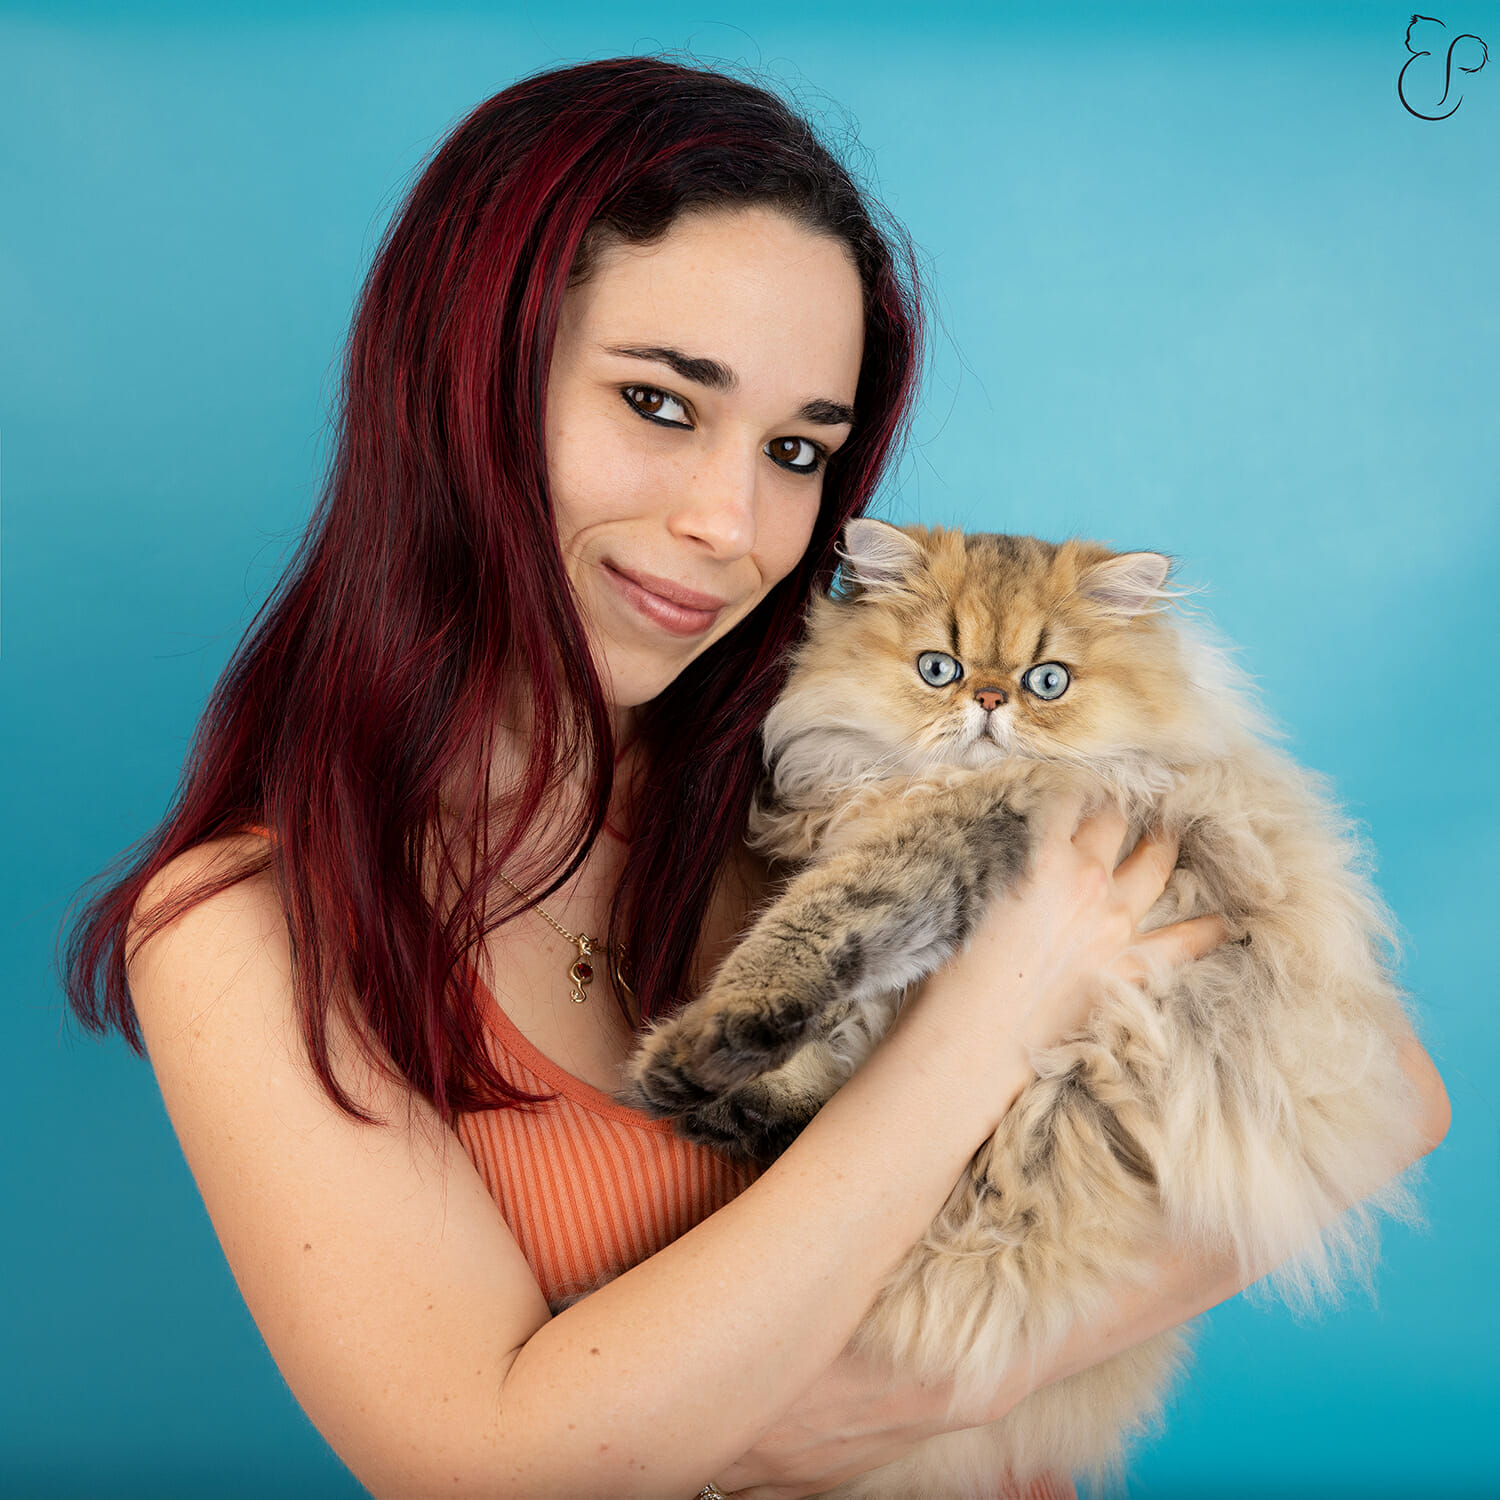 Breeder and owner of ethereal persians cattery, Roxy, holding a golden persian cat with aqua eyes in front of blue background. 